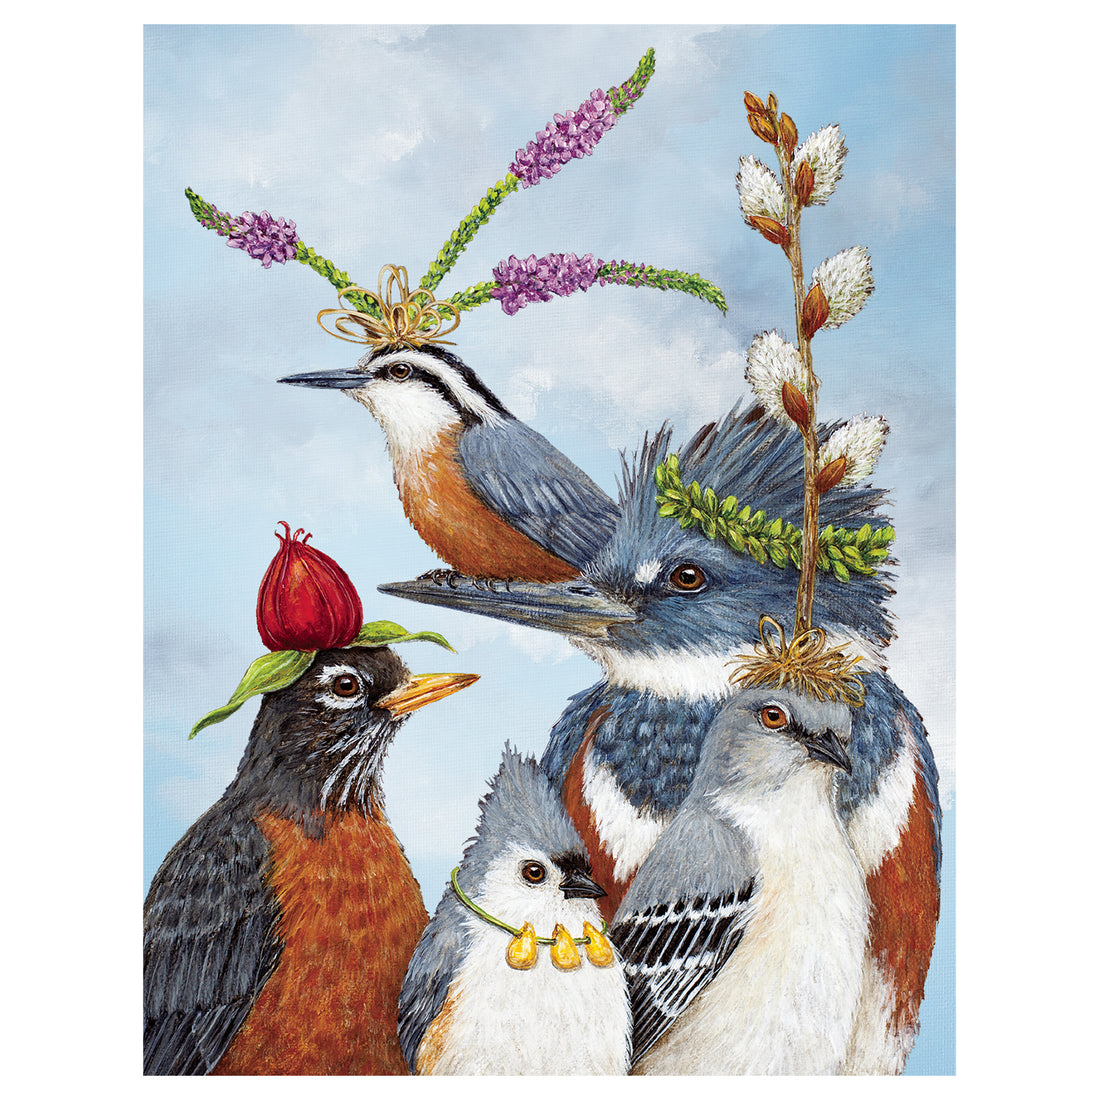 A vibrant Party Friends Card showcasing a flock of birds adorned with colorful flowers on their heads from Hester &amp; Cook.